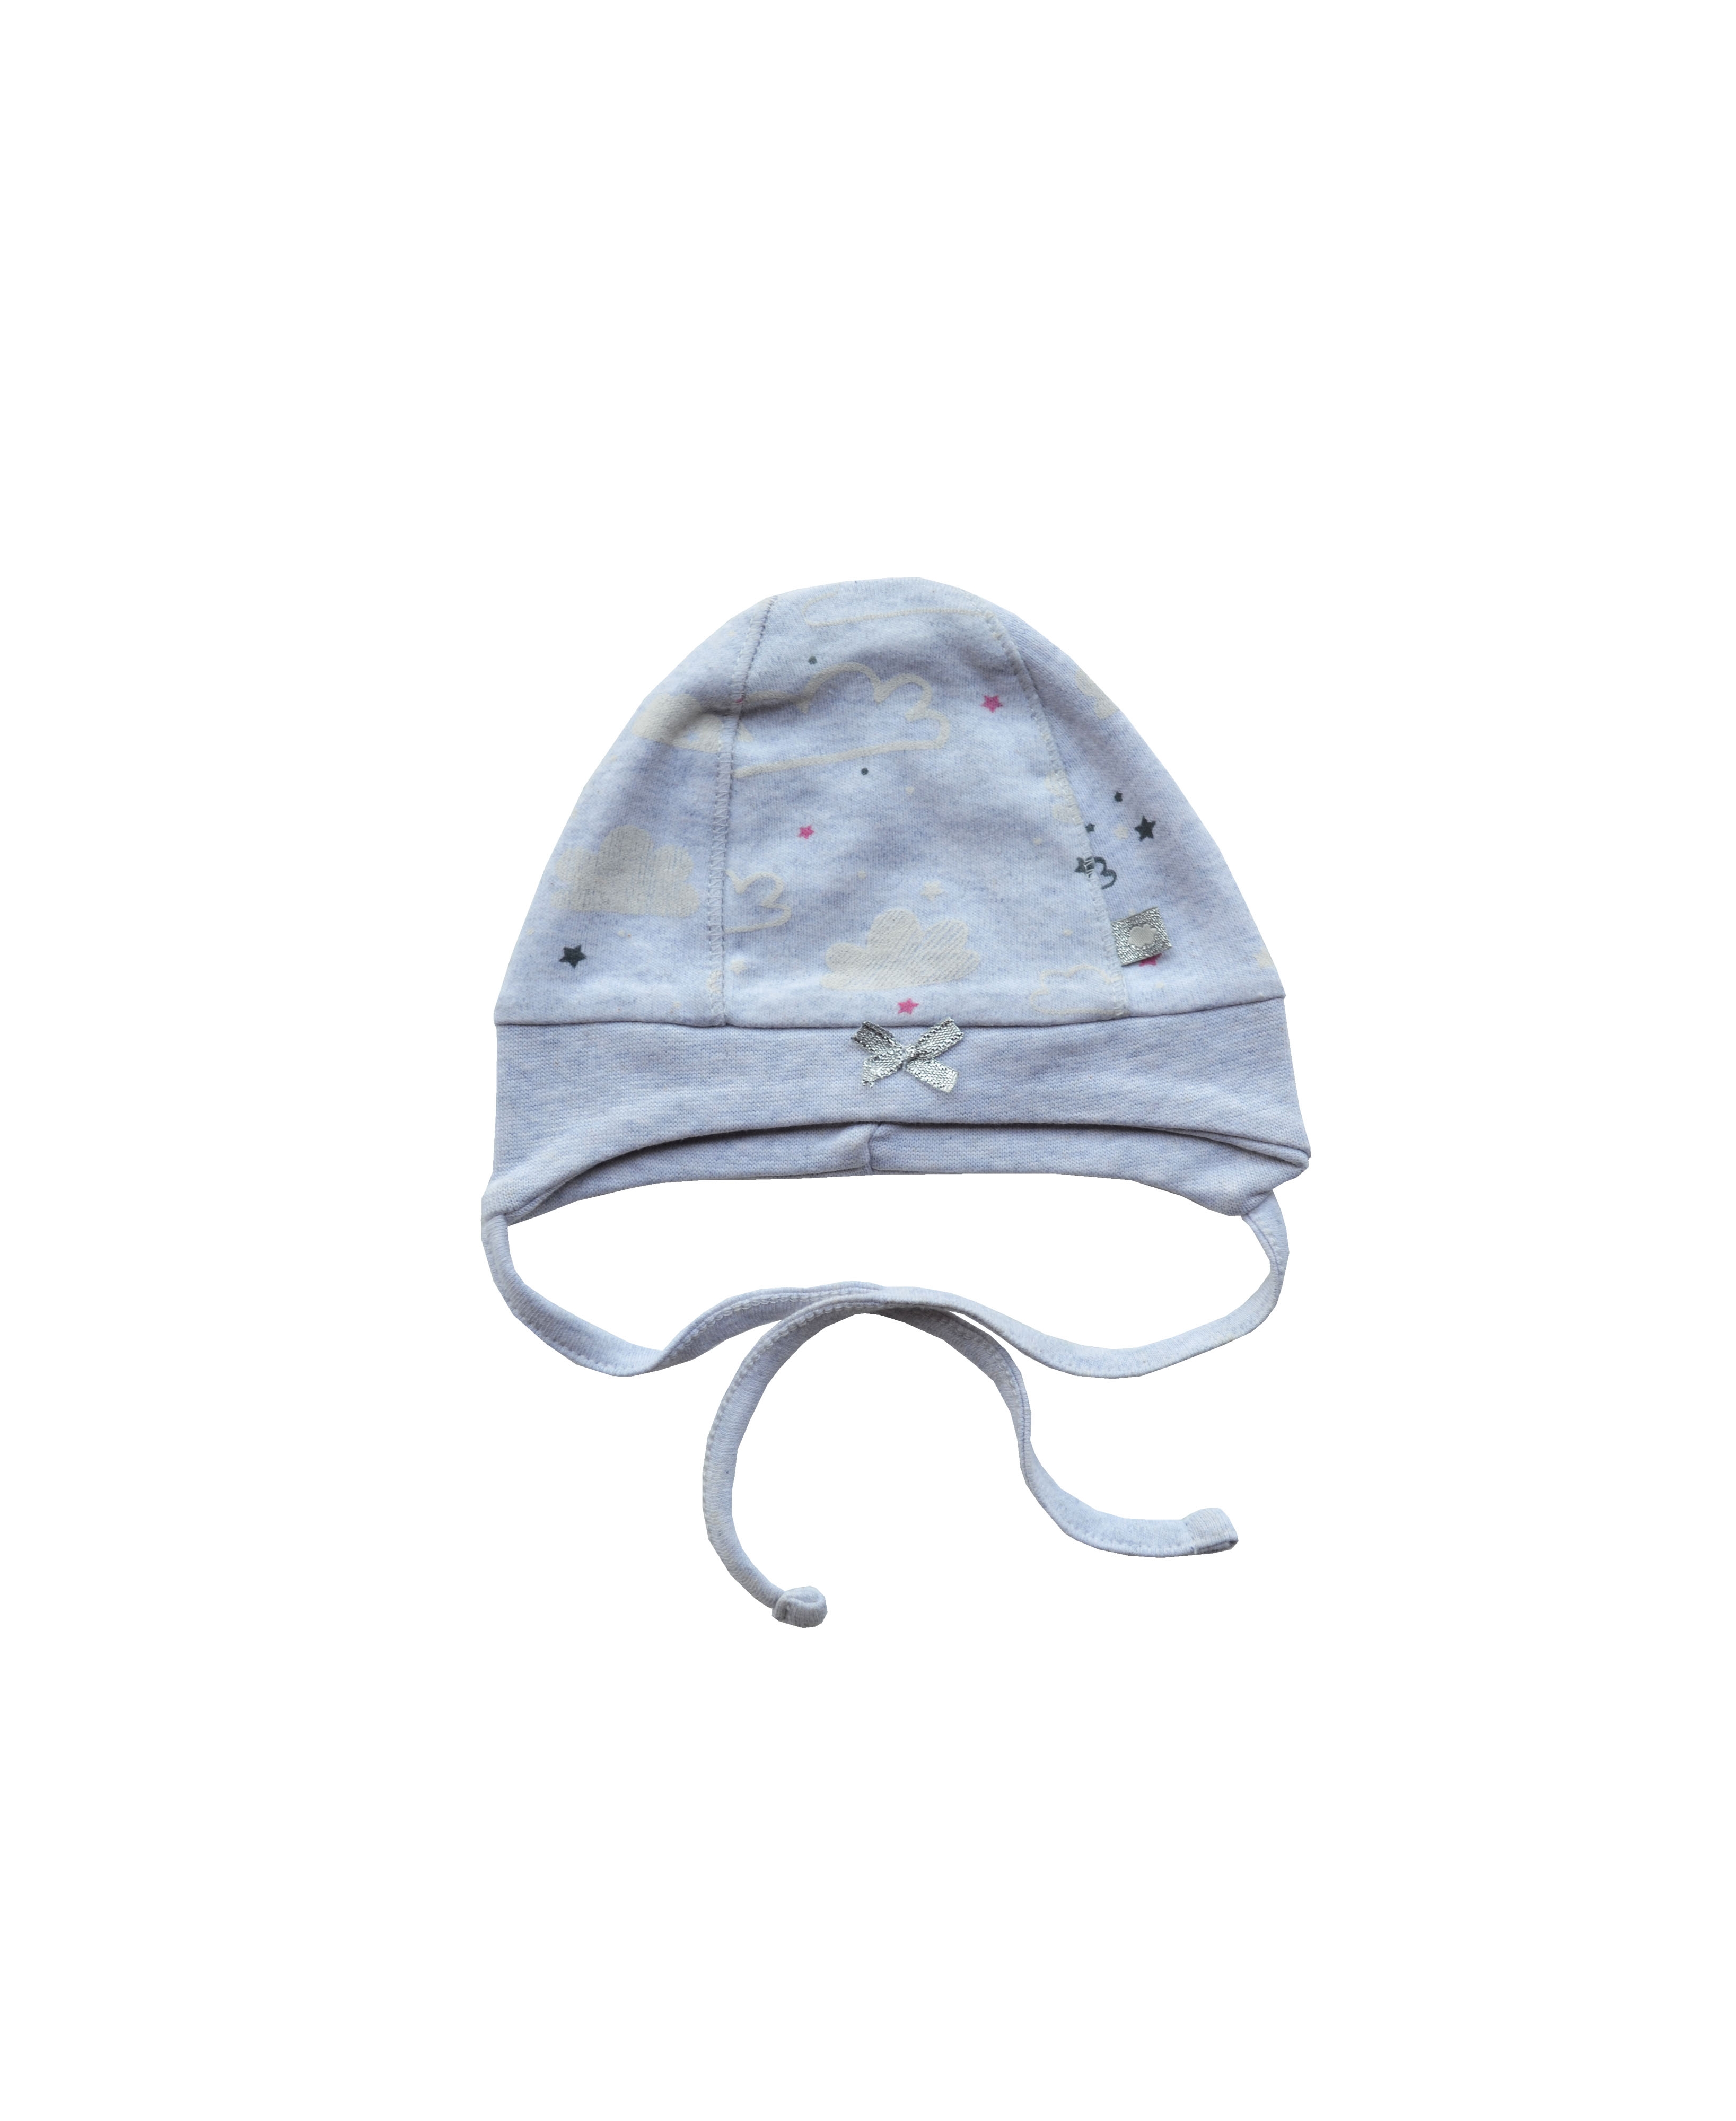 Babeez | Grey Cap with Cloud Print and Silver Bow (100% Cotton Interlock) undefined